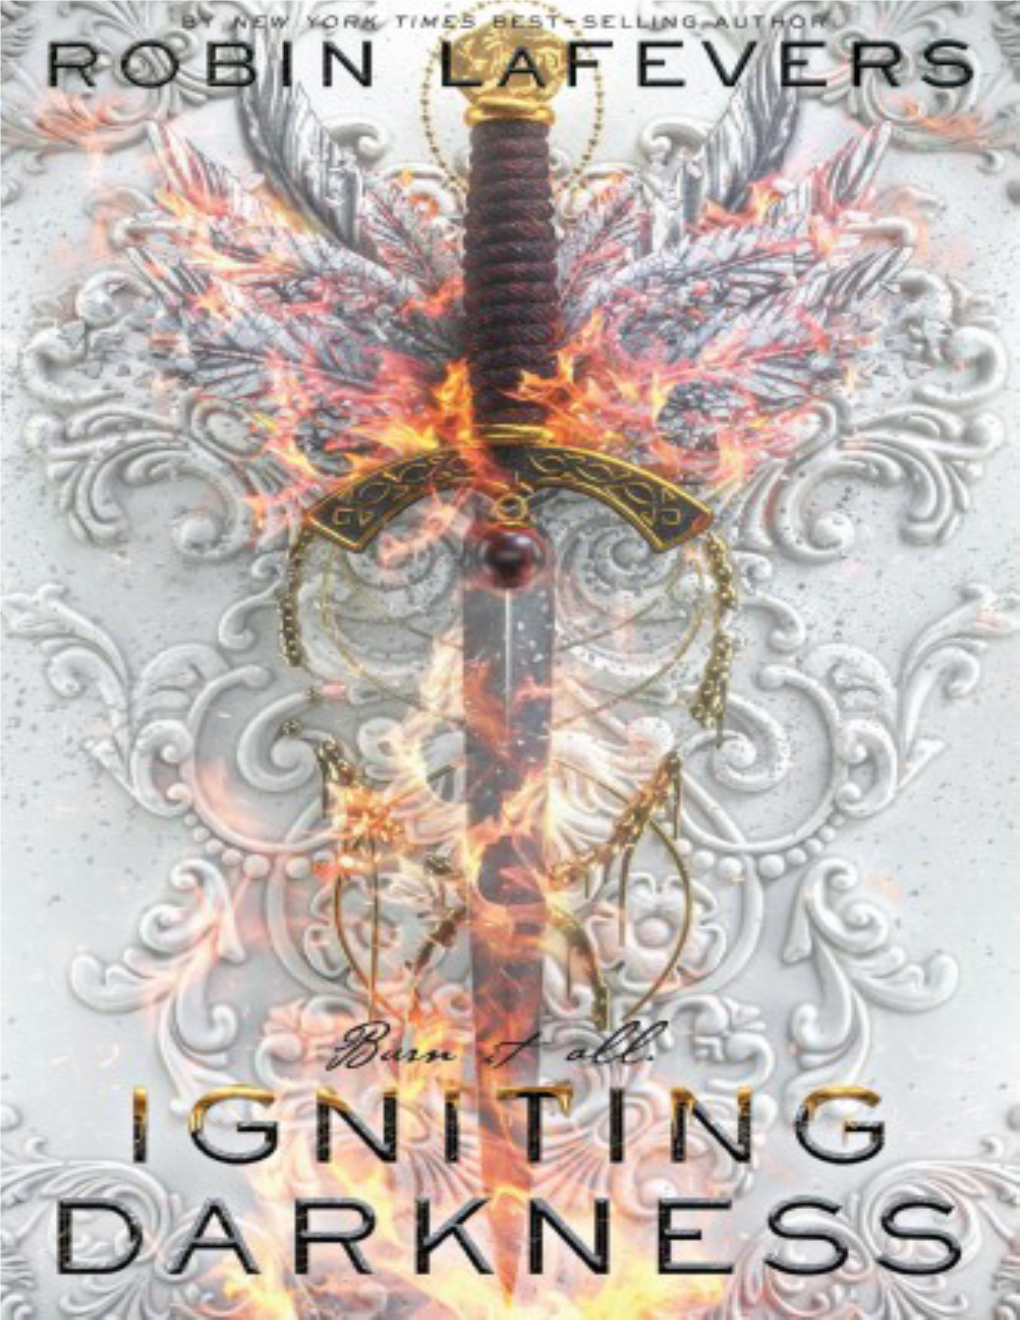 Igniting Darkness / by Robin Lafevers